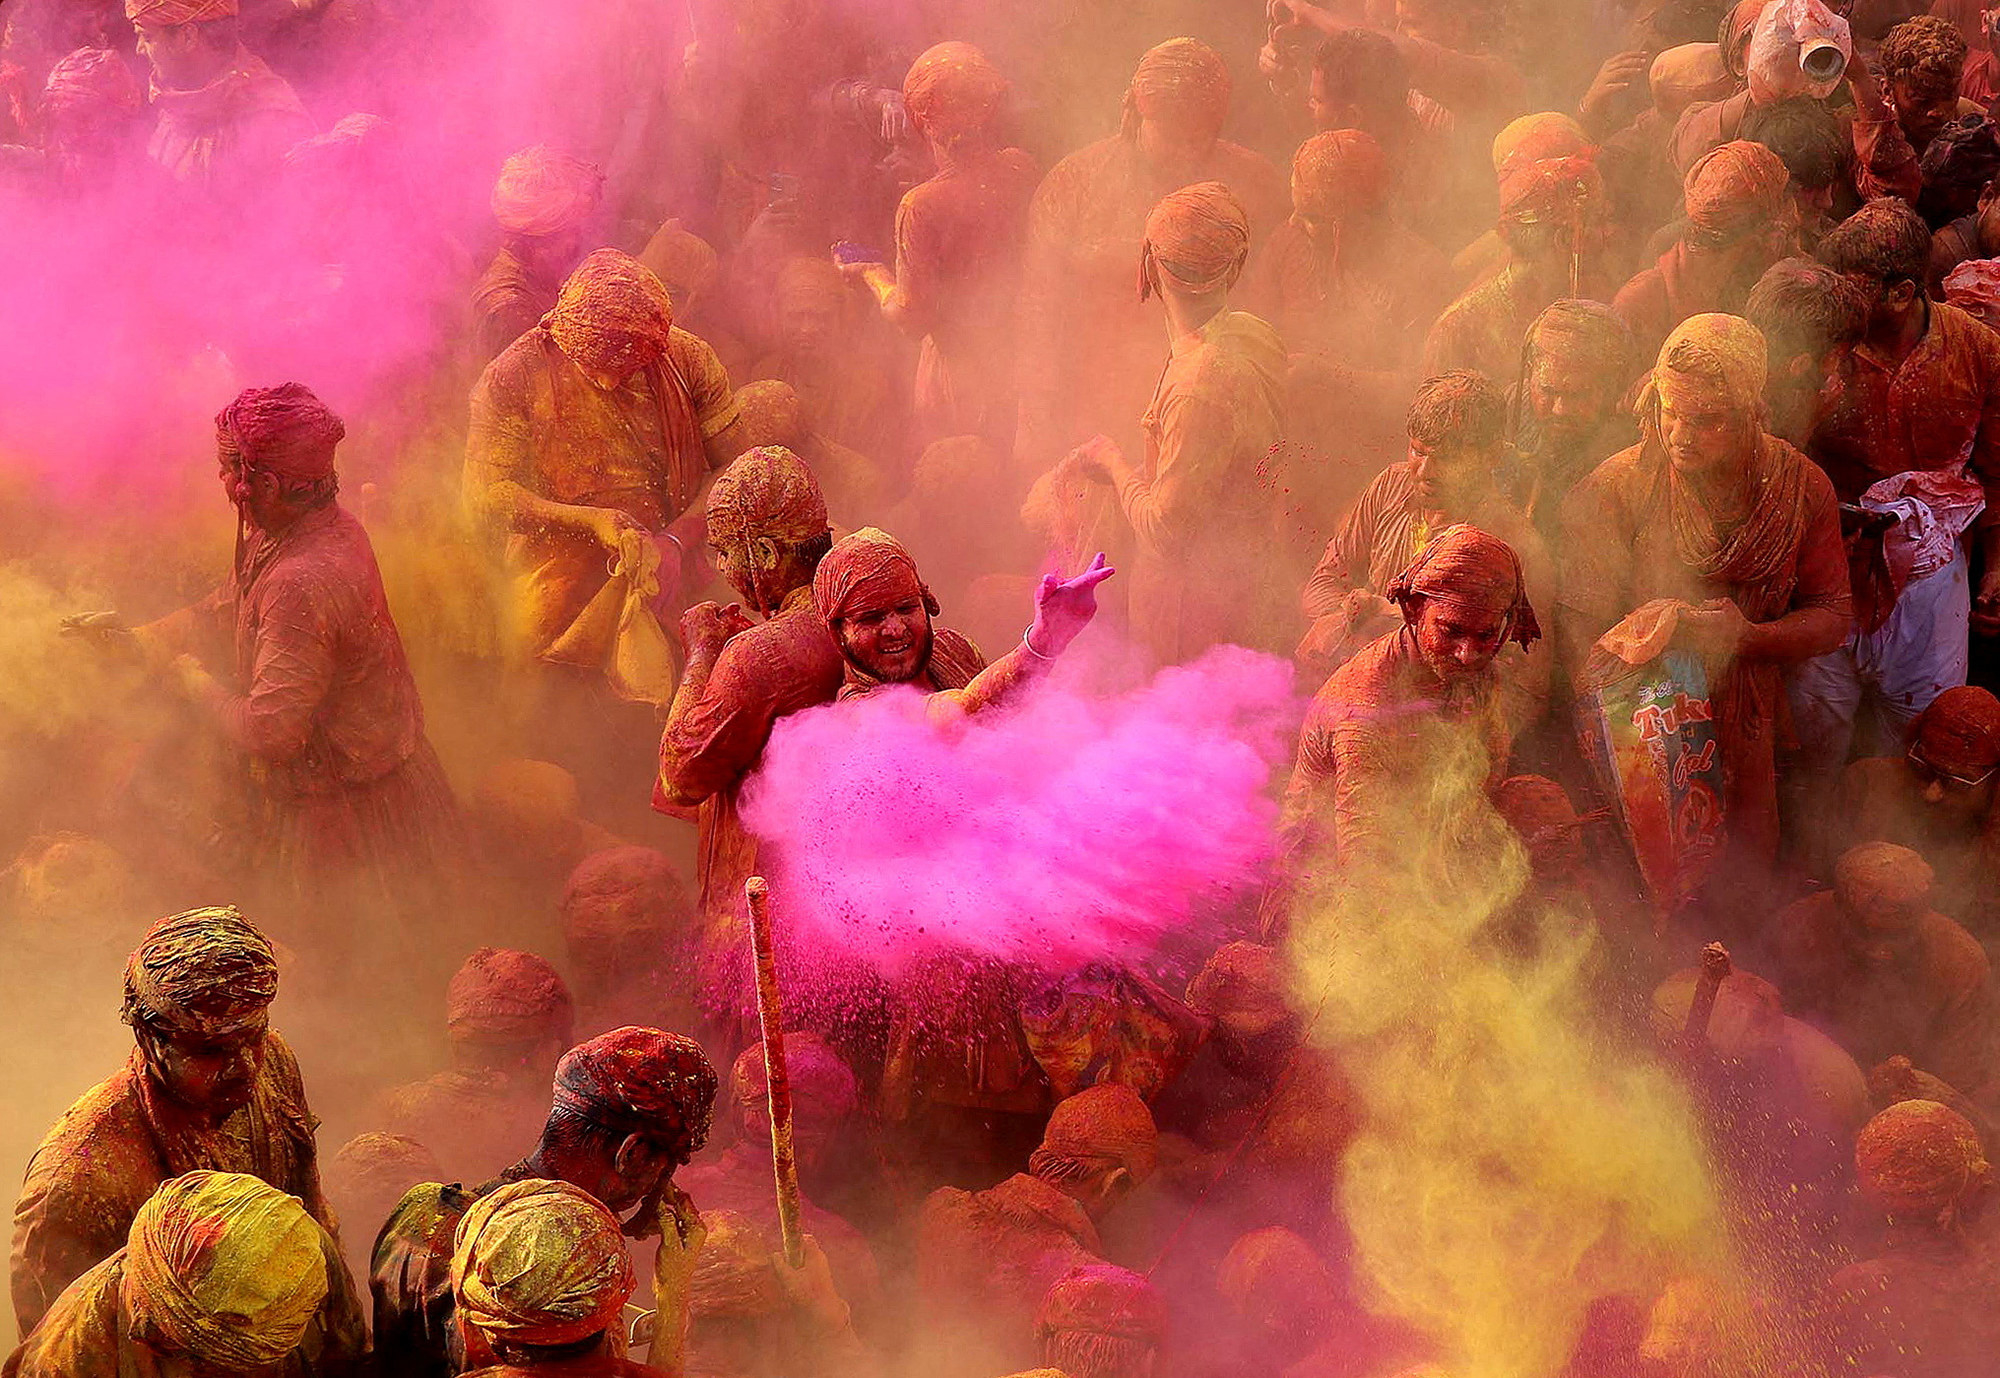 During a Holi celebration, a hazy overhead view of a crowd of people covered in colorful dust amid clouds of yellow and pink powder being tossed at one another